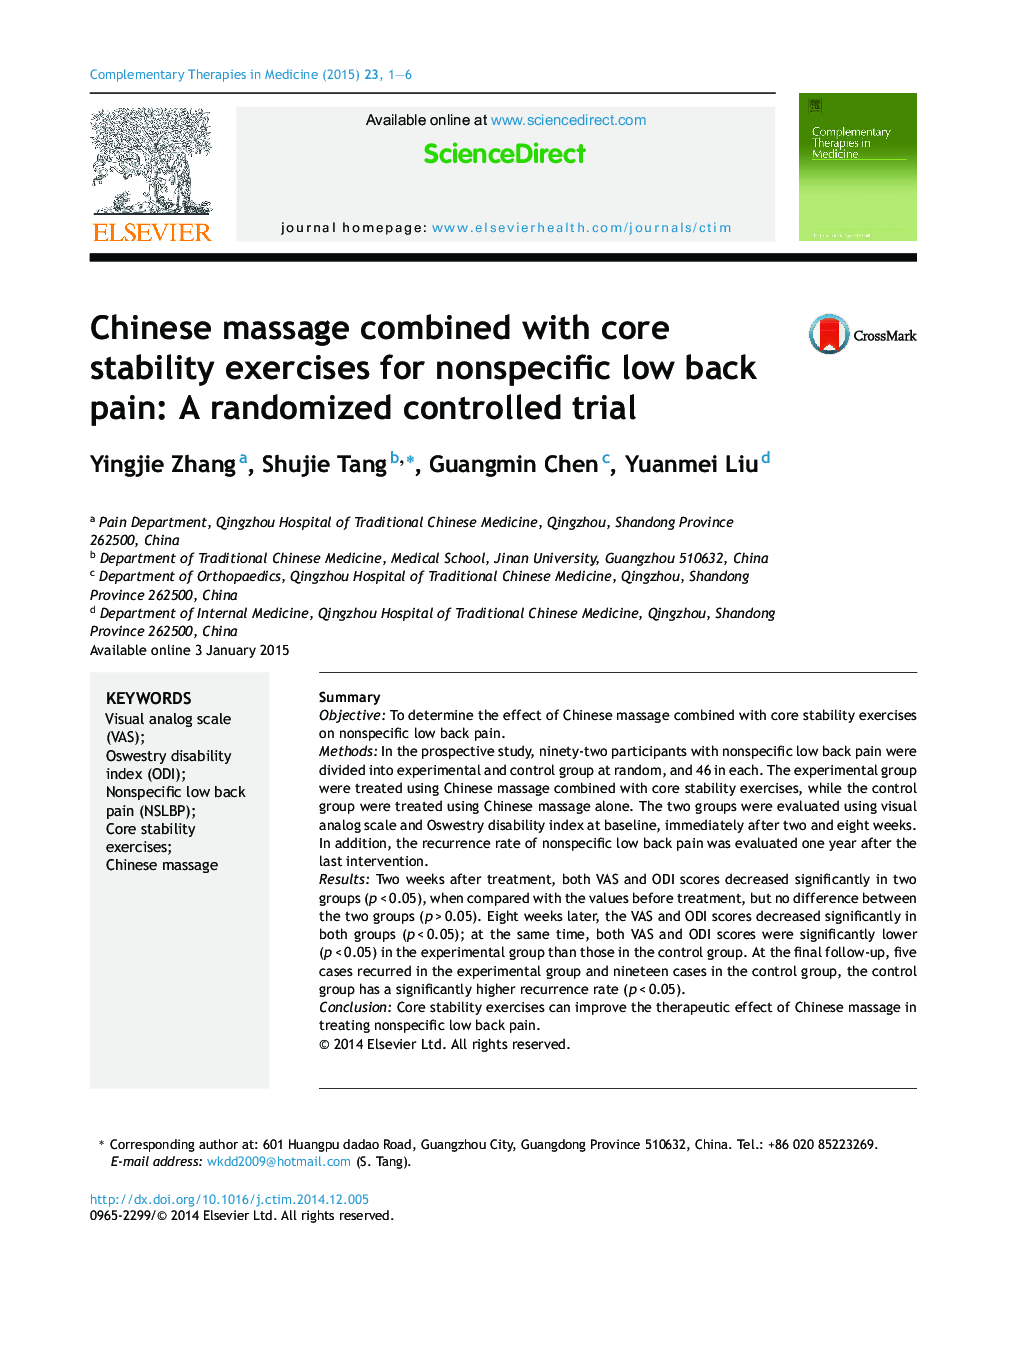 Chinese massage combined with core stability exercises for nonspecific low back pain: A randomized controlled trial